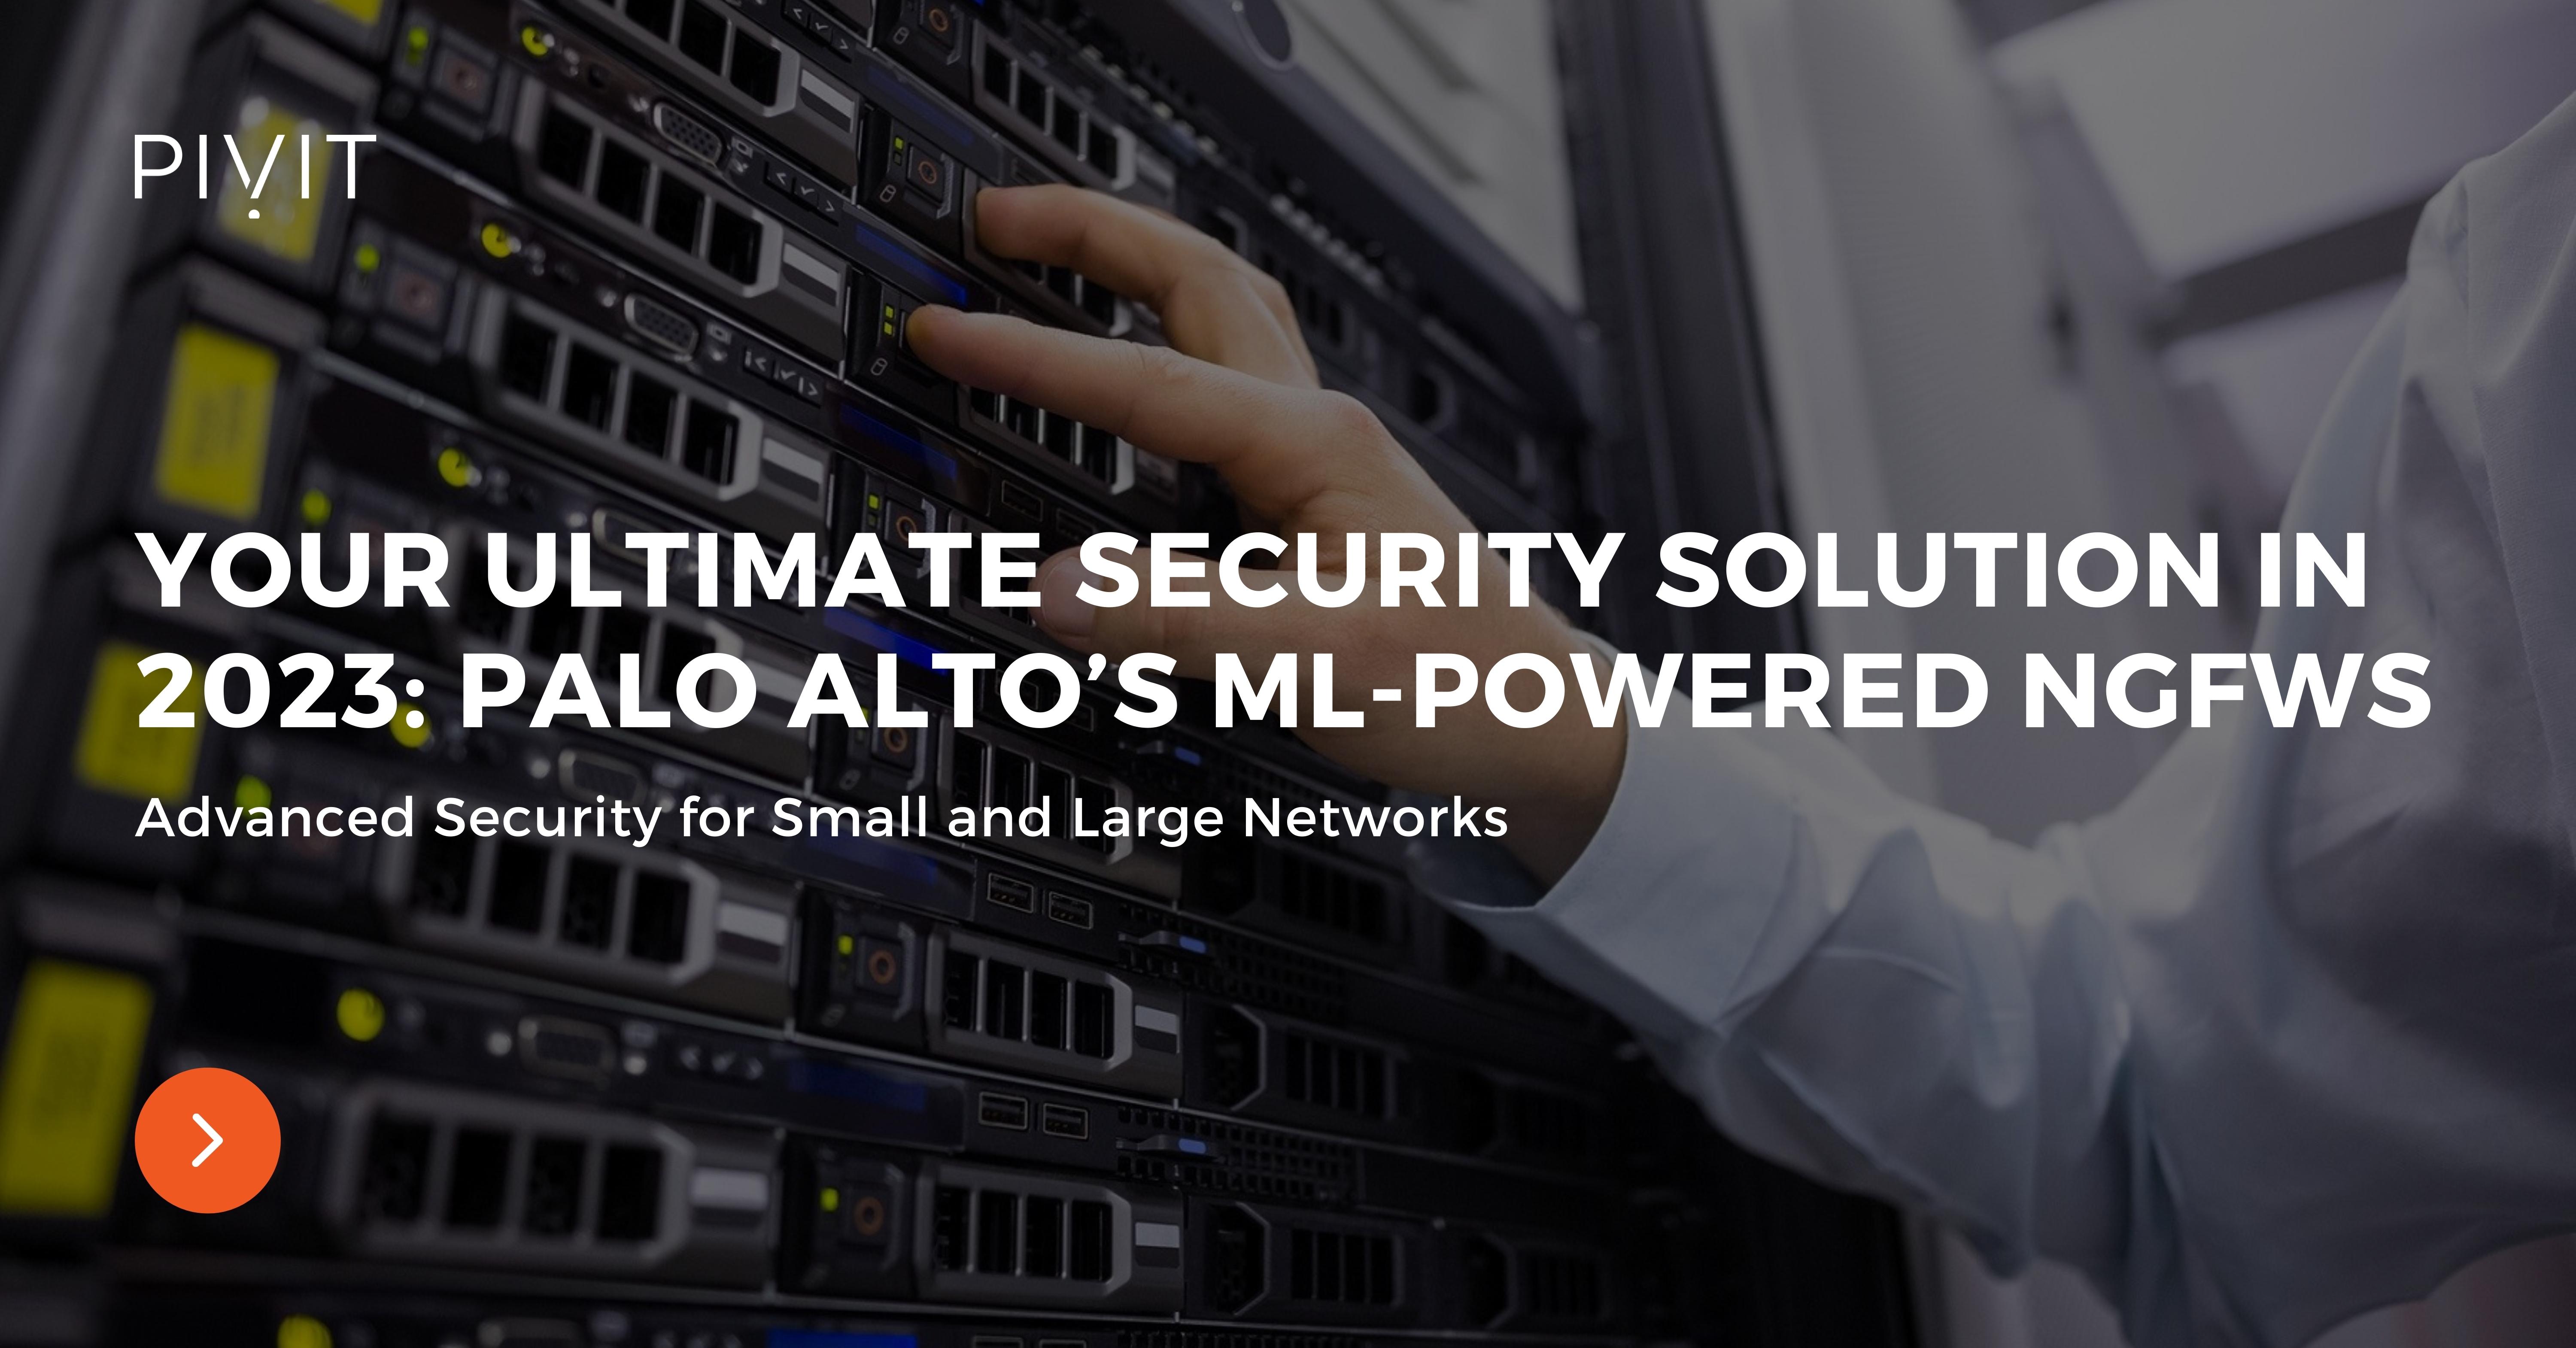 Your Ultimate Security Solution in 2023: Palo Alto’s ML-Powered NGFWs - Advanced Security for Small and Large Networks 